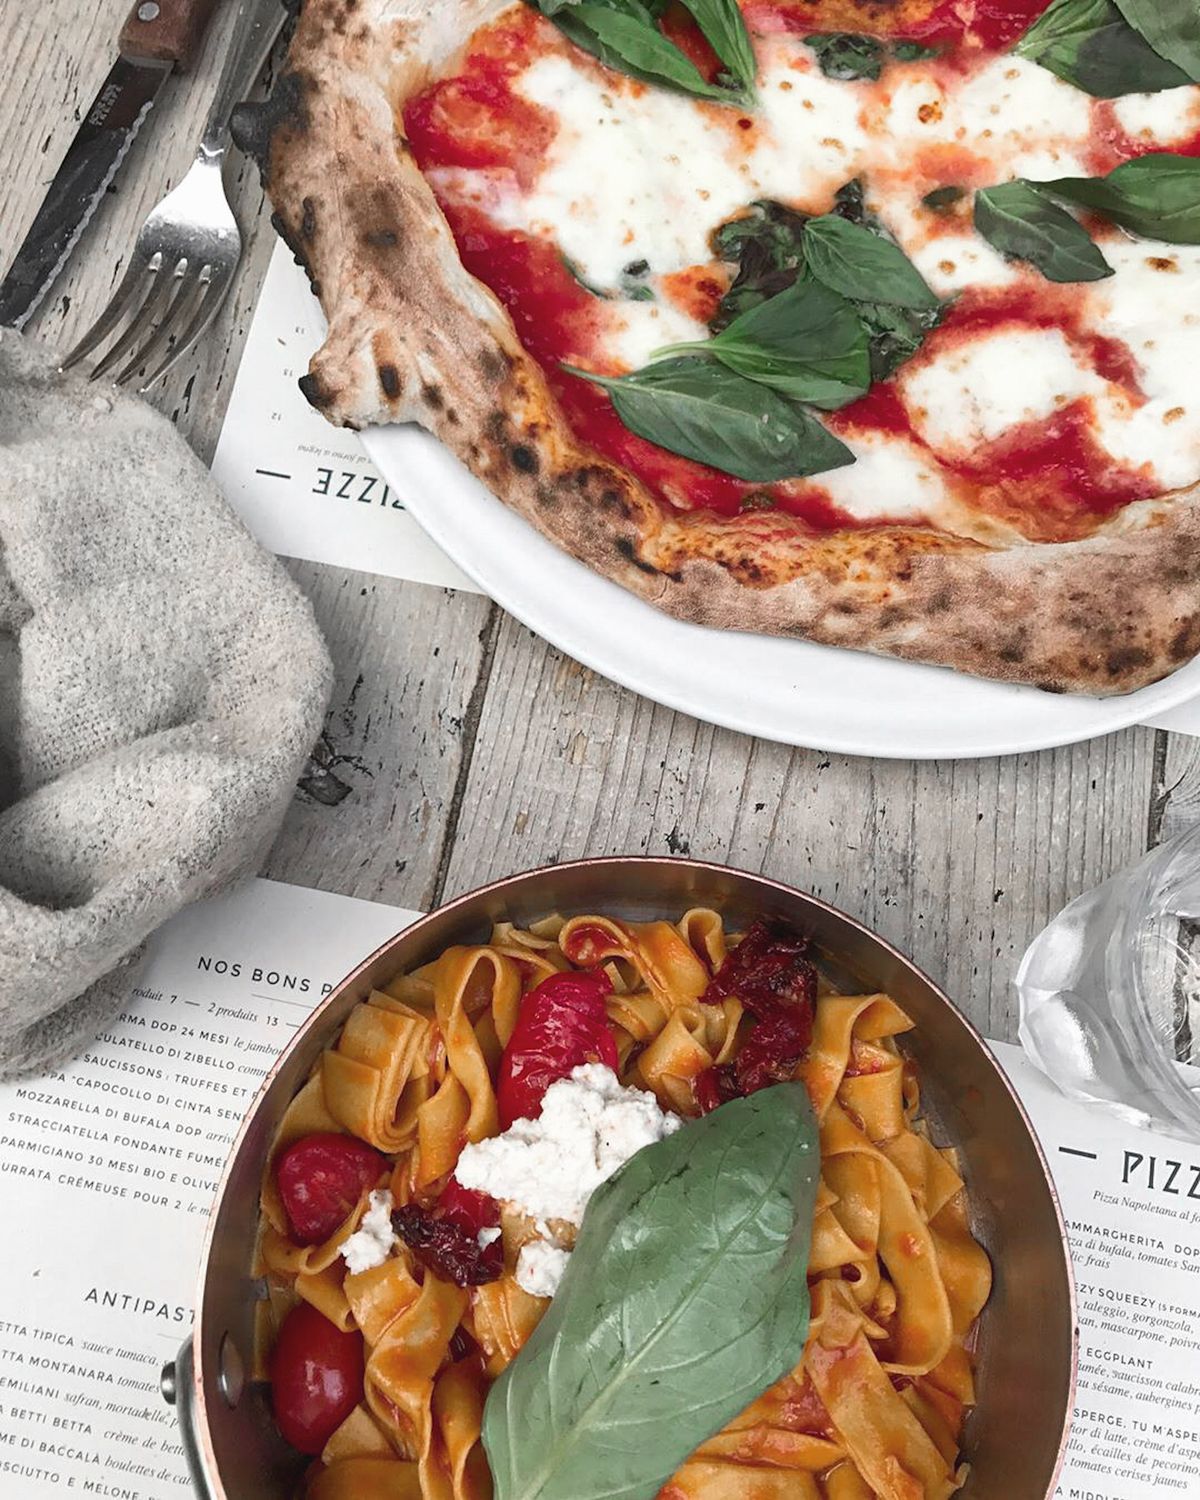 The 6 best Italian restaurants in Central - Your go-to list